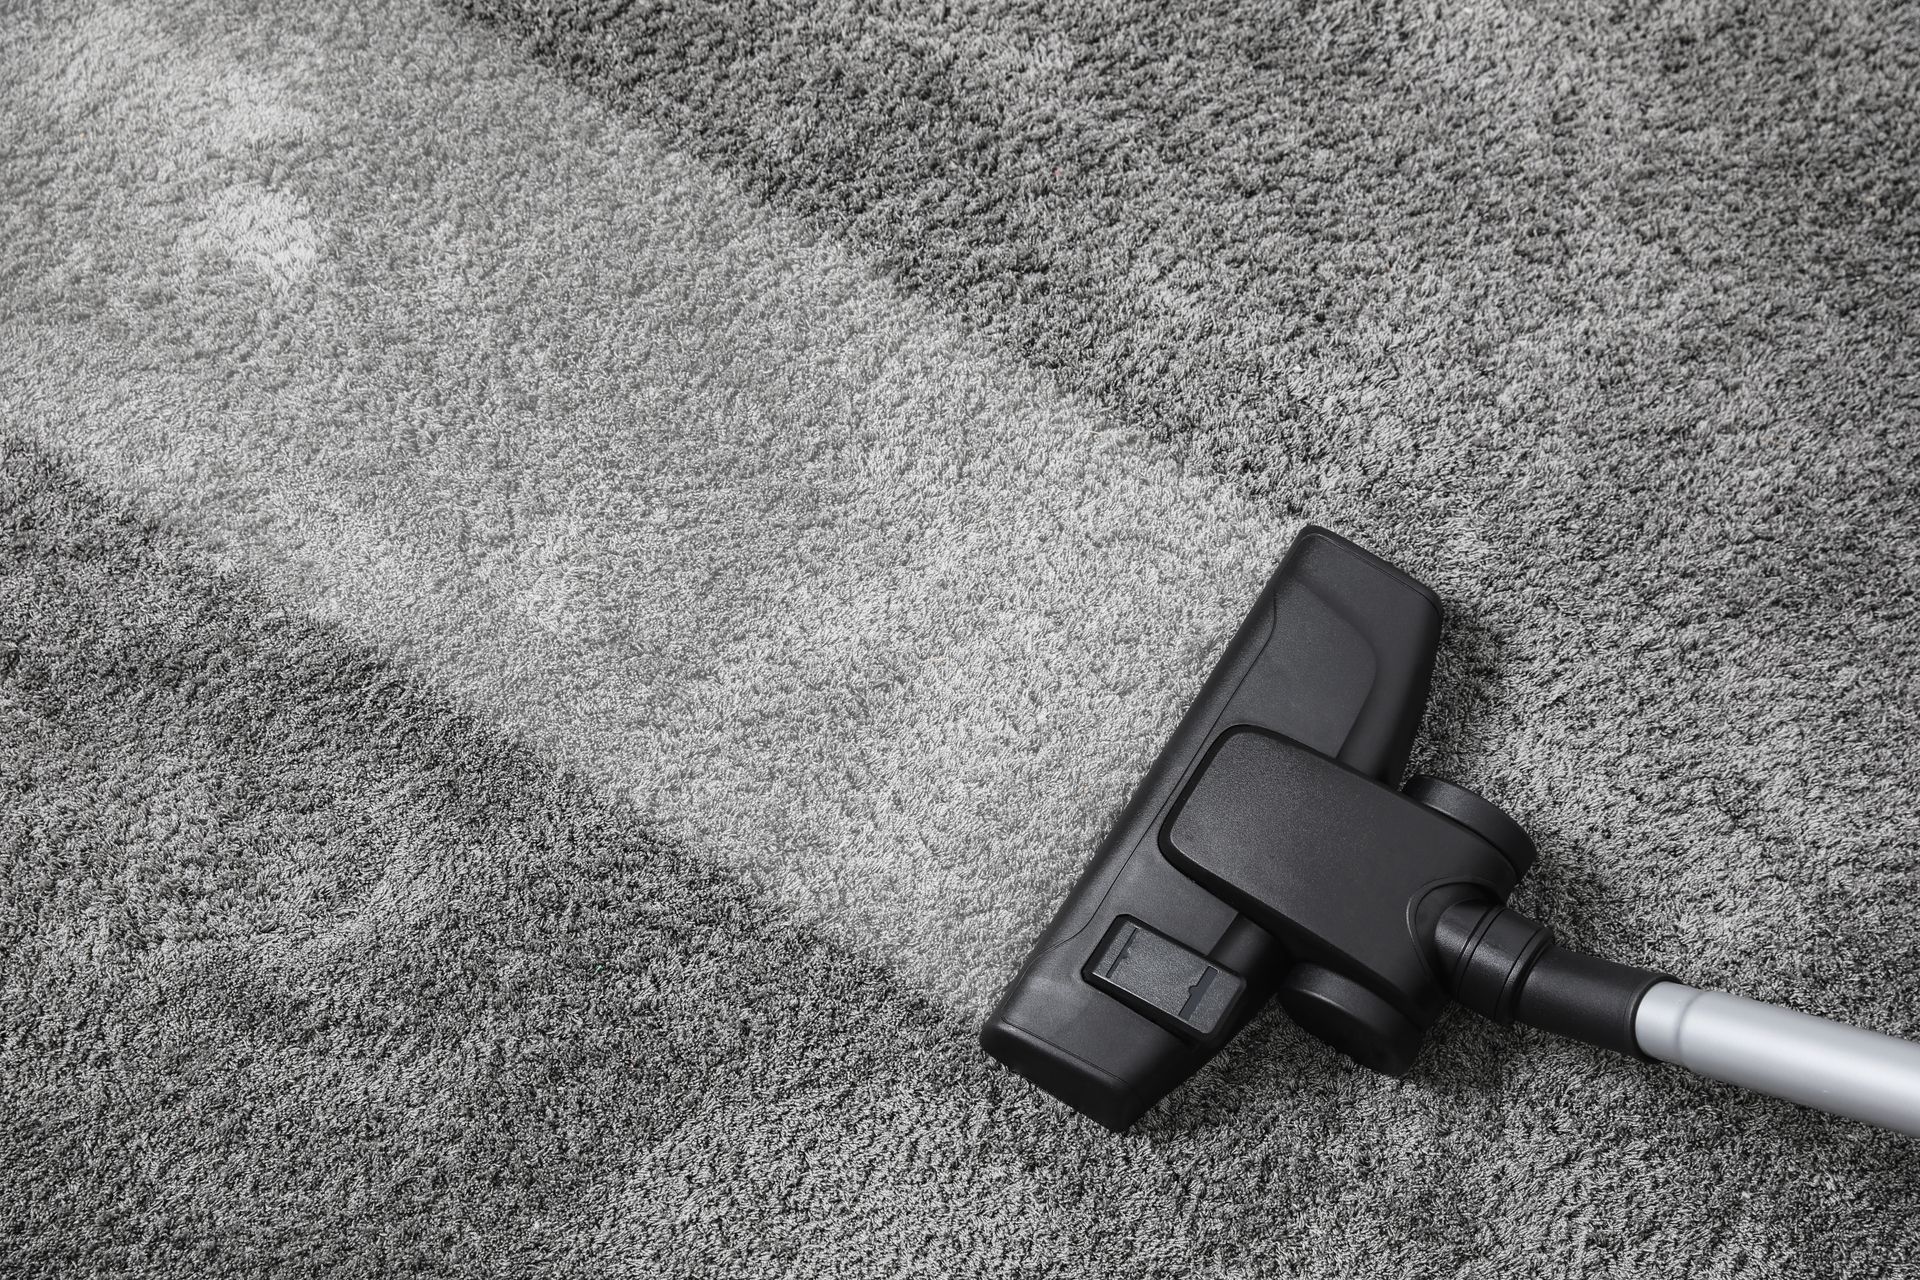 A black and white photo of a vacuum cleaner cleaning a carpet.